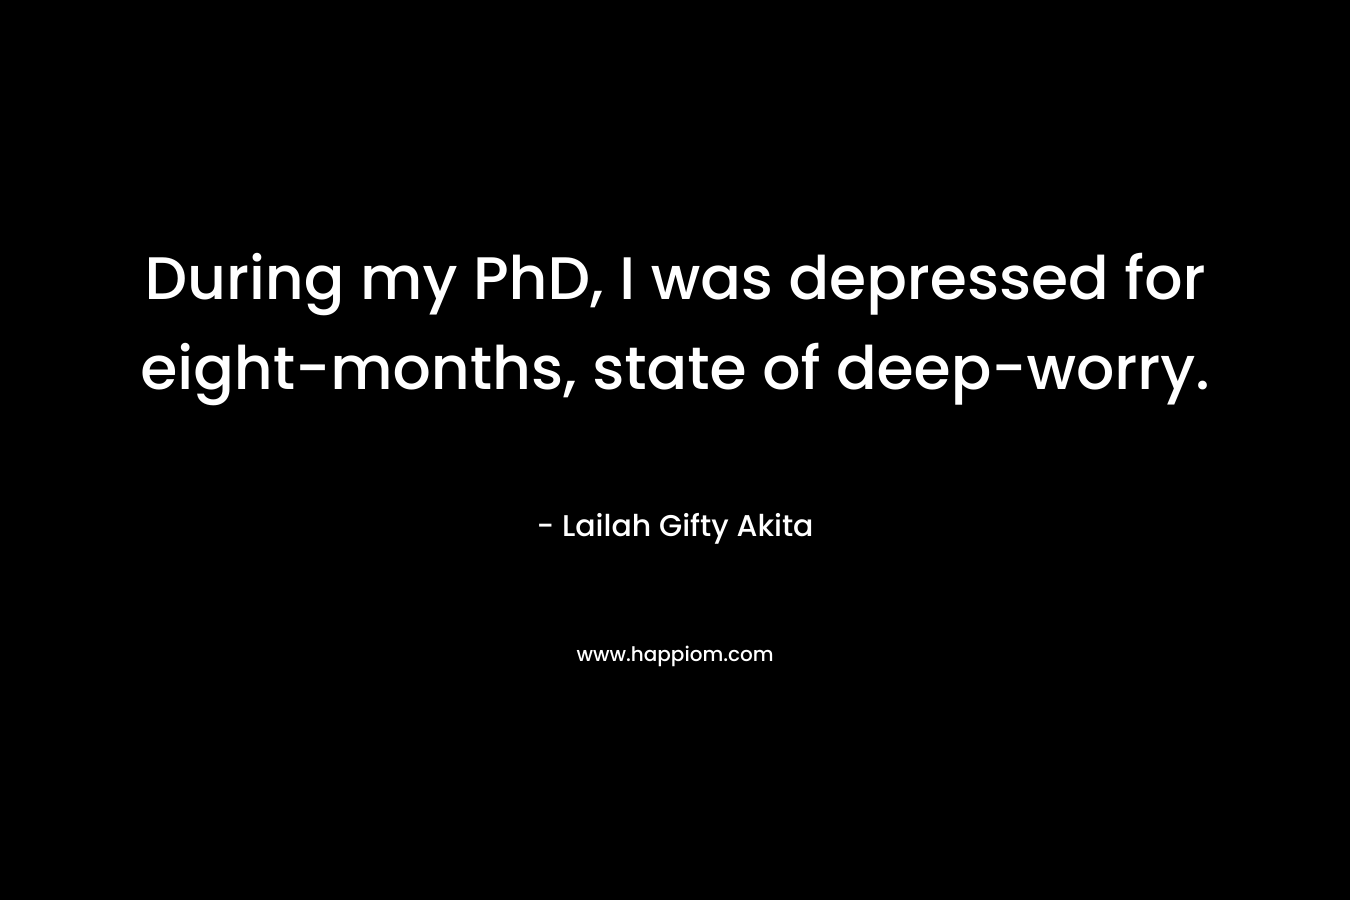 During my PhD, I was depressed for eight-months, state of deep-worry.